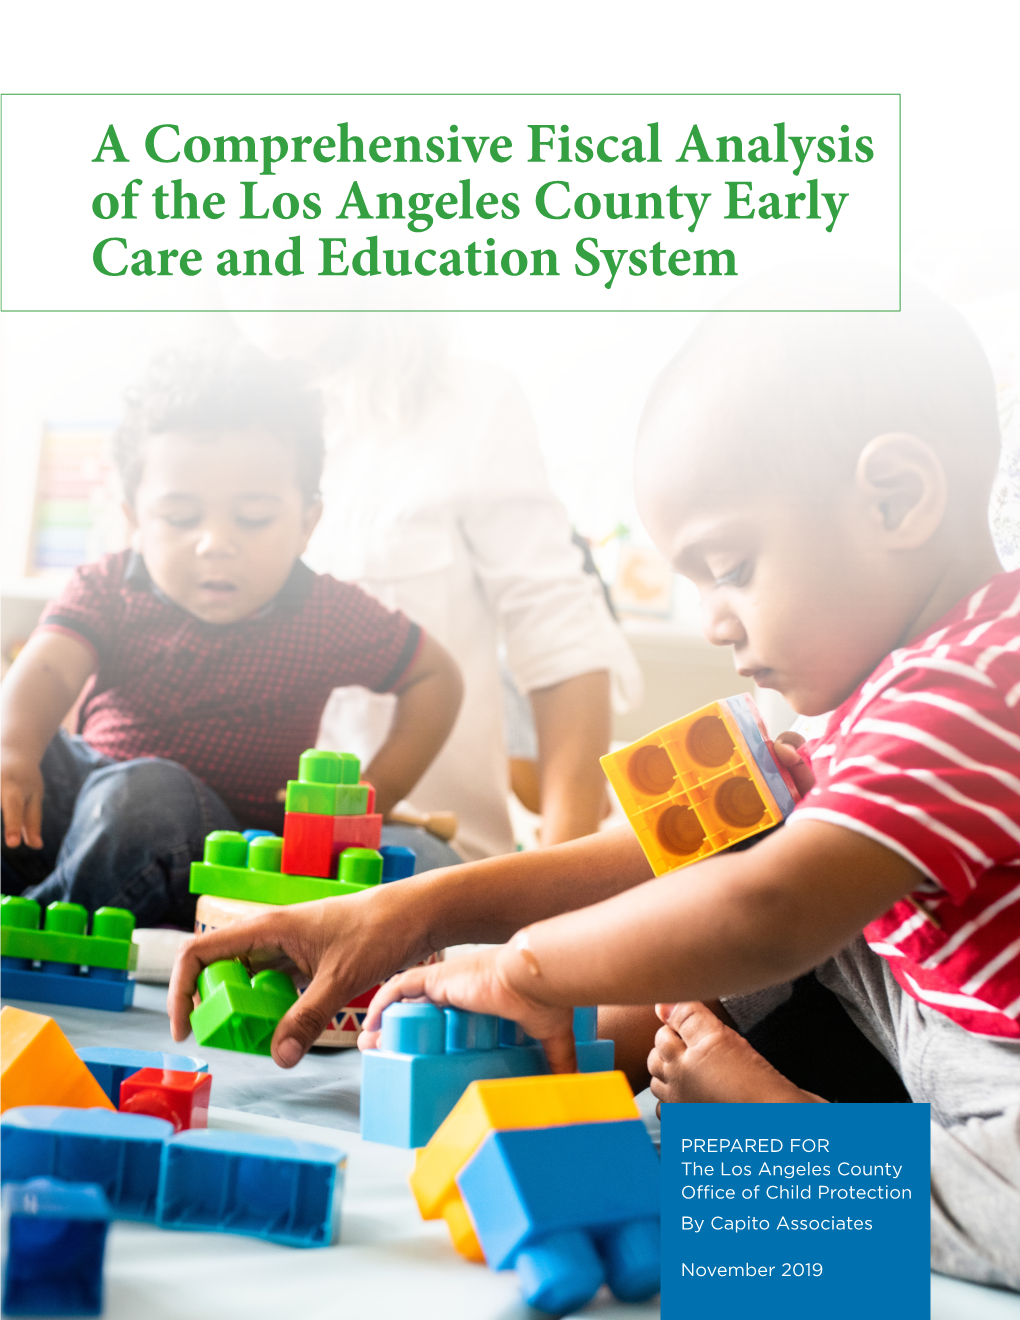 A Comprehensive Fiscal Analysis of the Los Angeles County Early Care and Education System